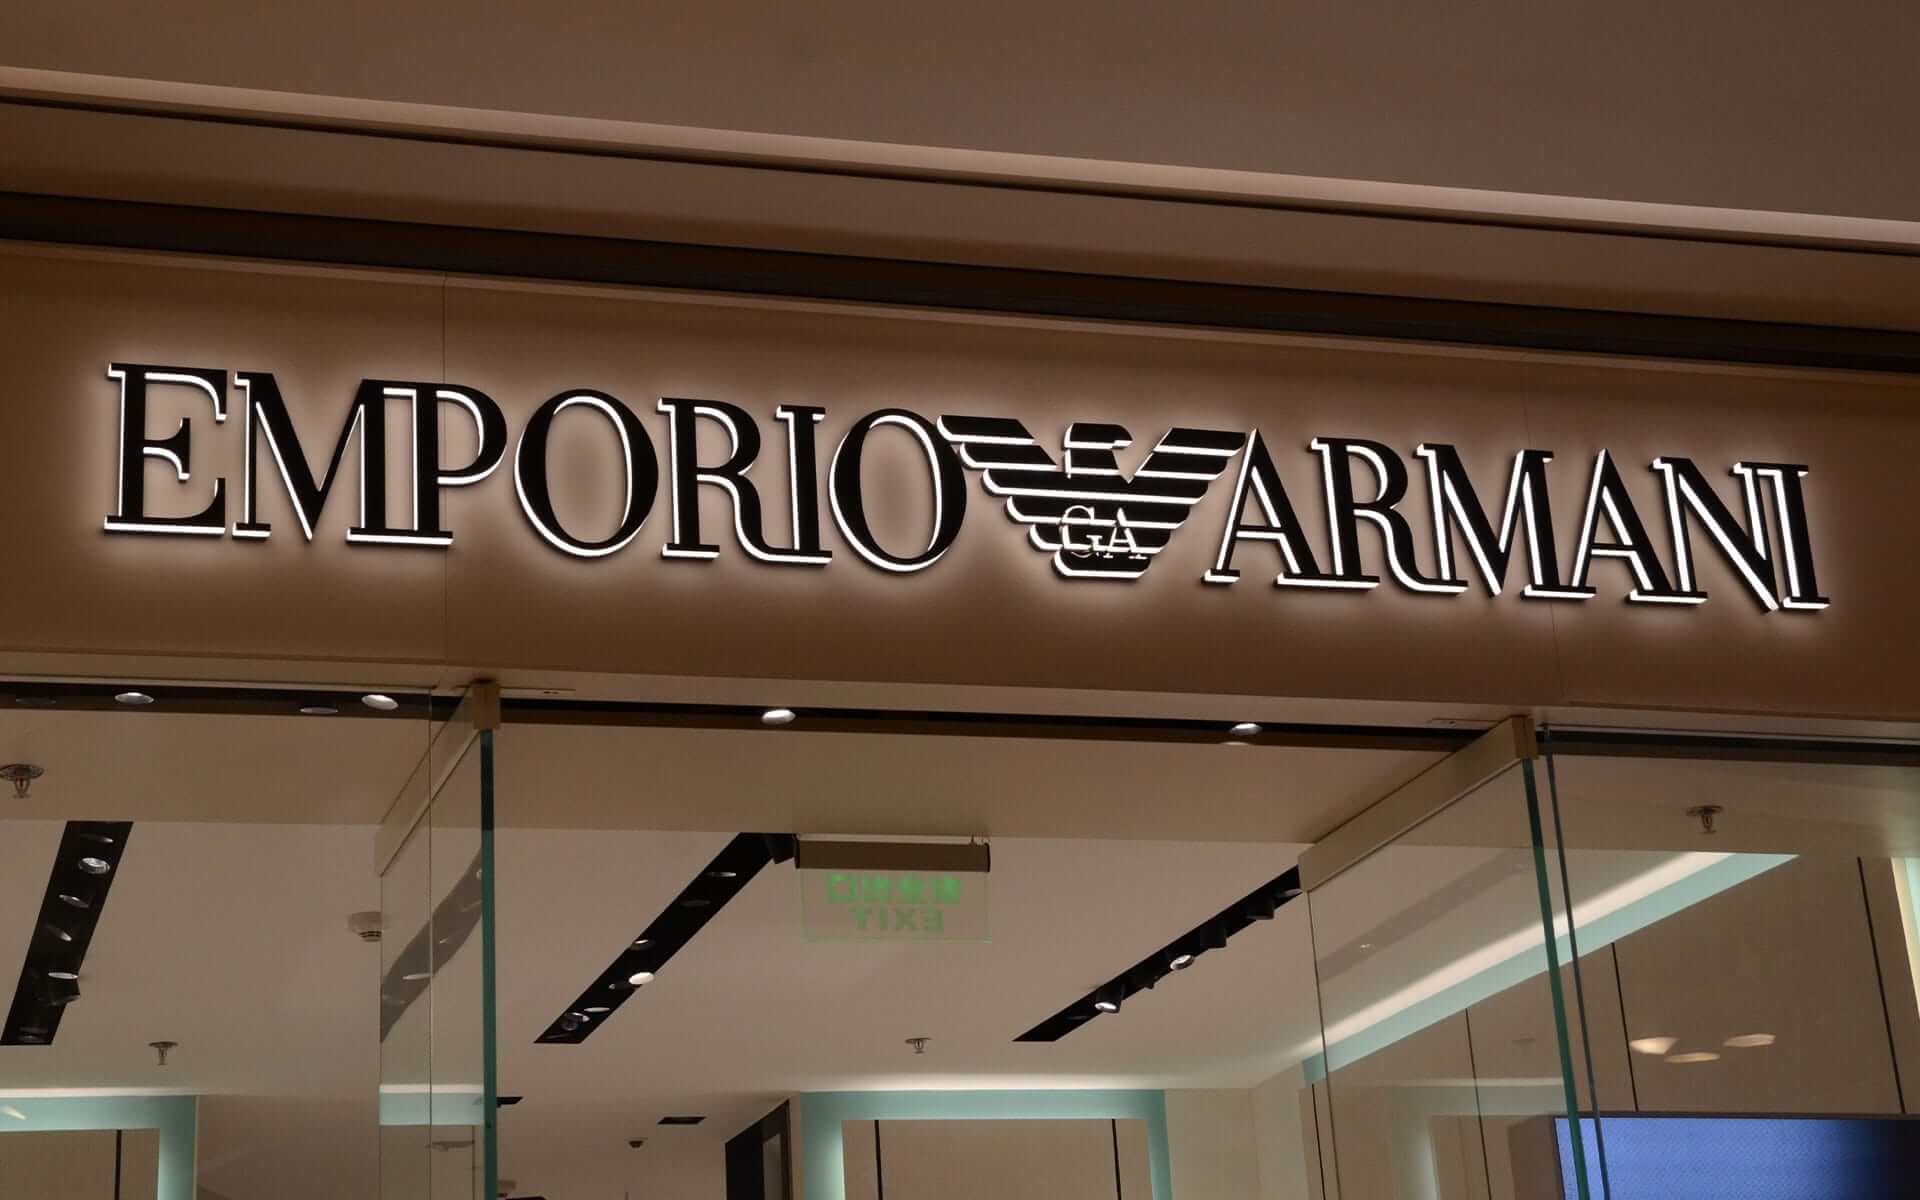 Side-lit Channel Letters for Emporio Armani